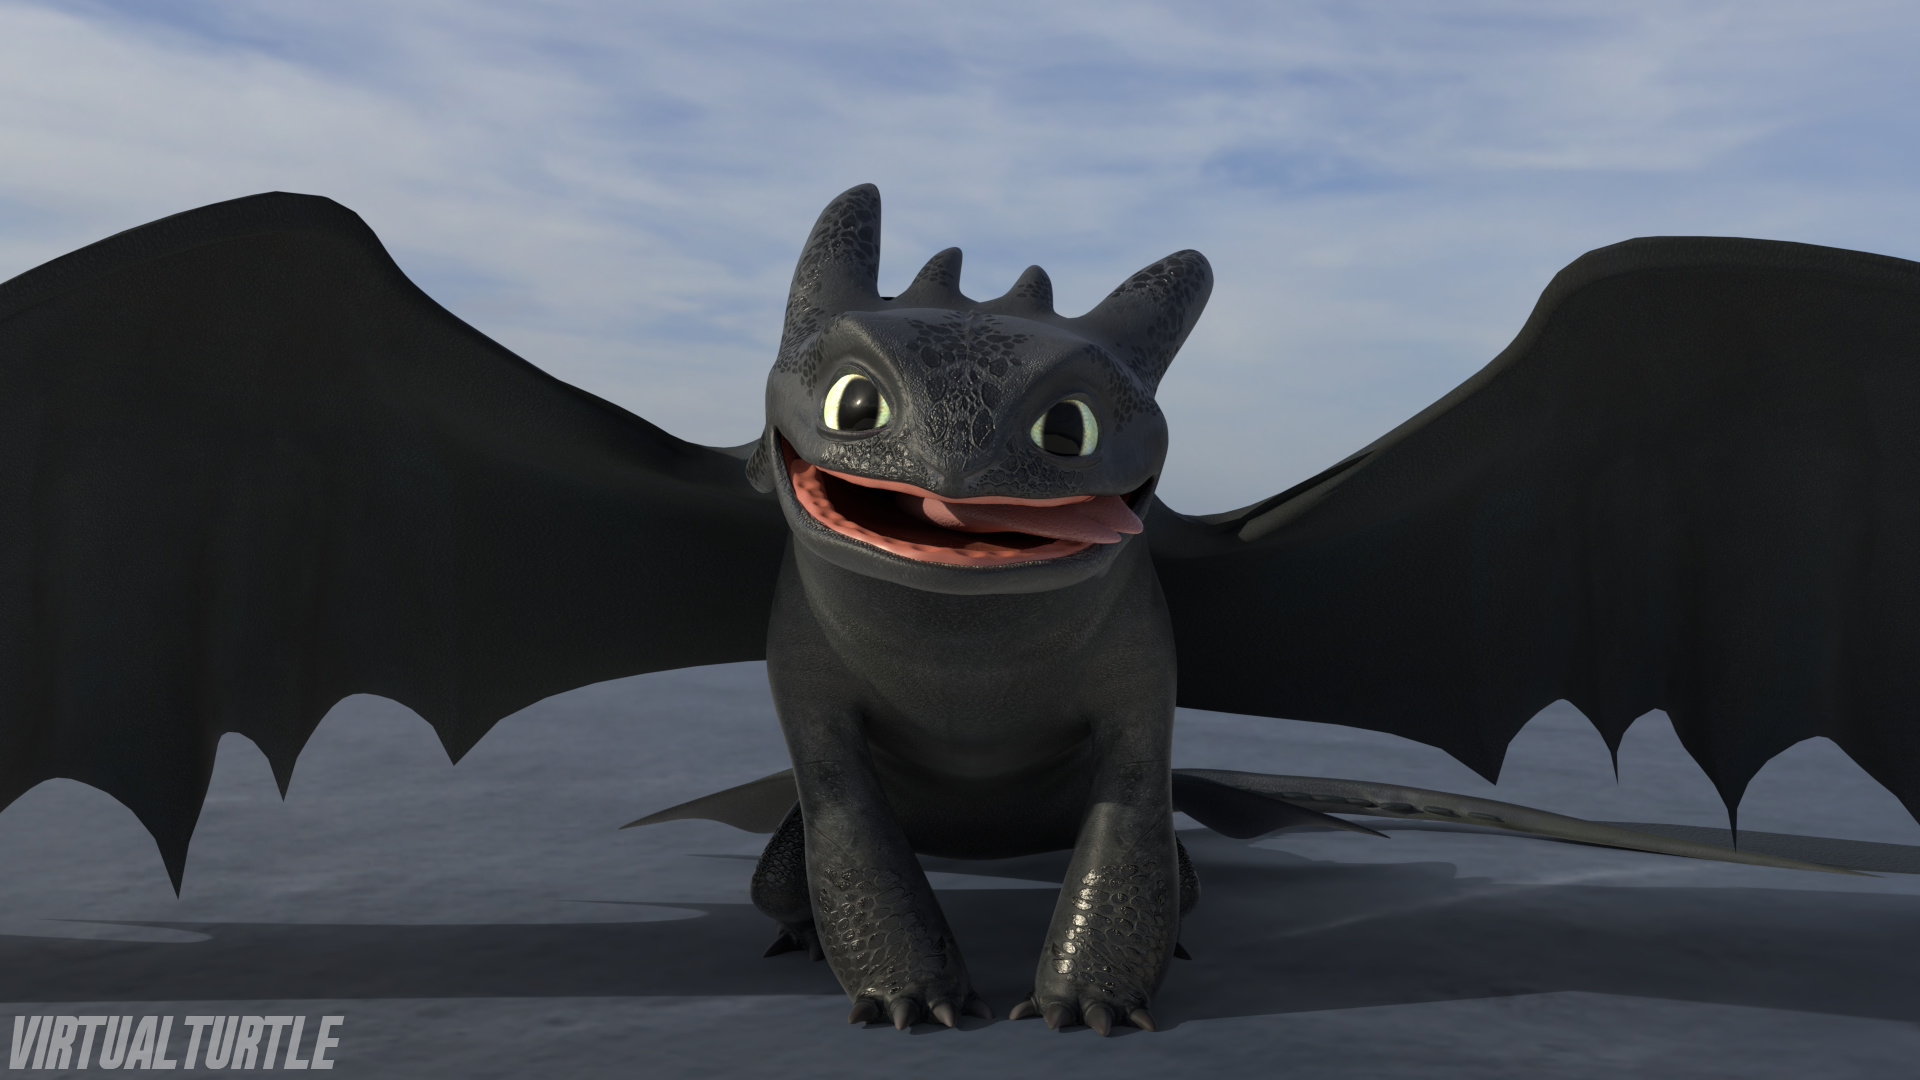 How to train your Dragon - Toothless - #5 by Wasfi_Akab - Fi